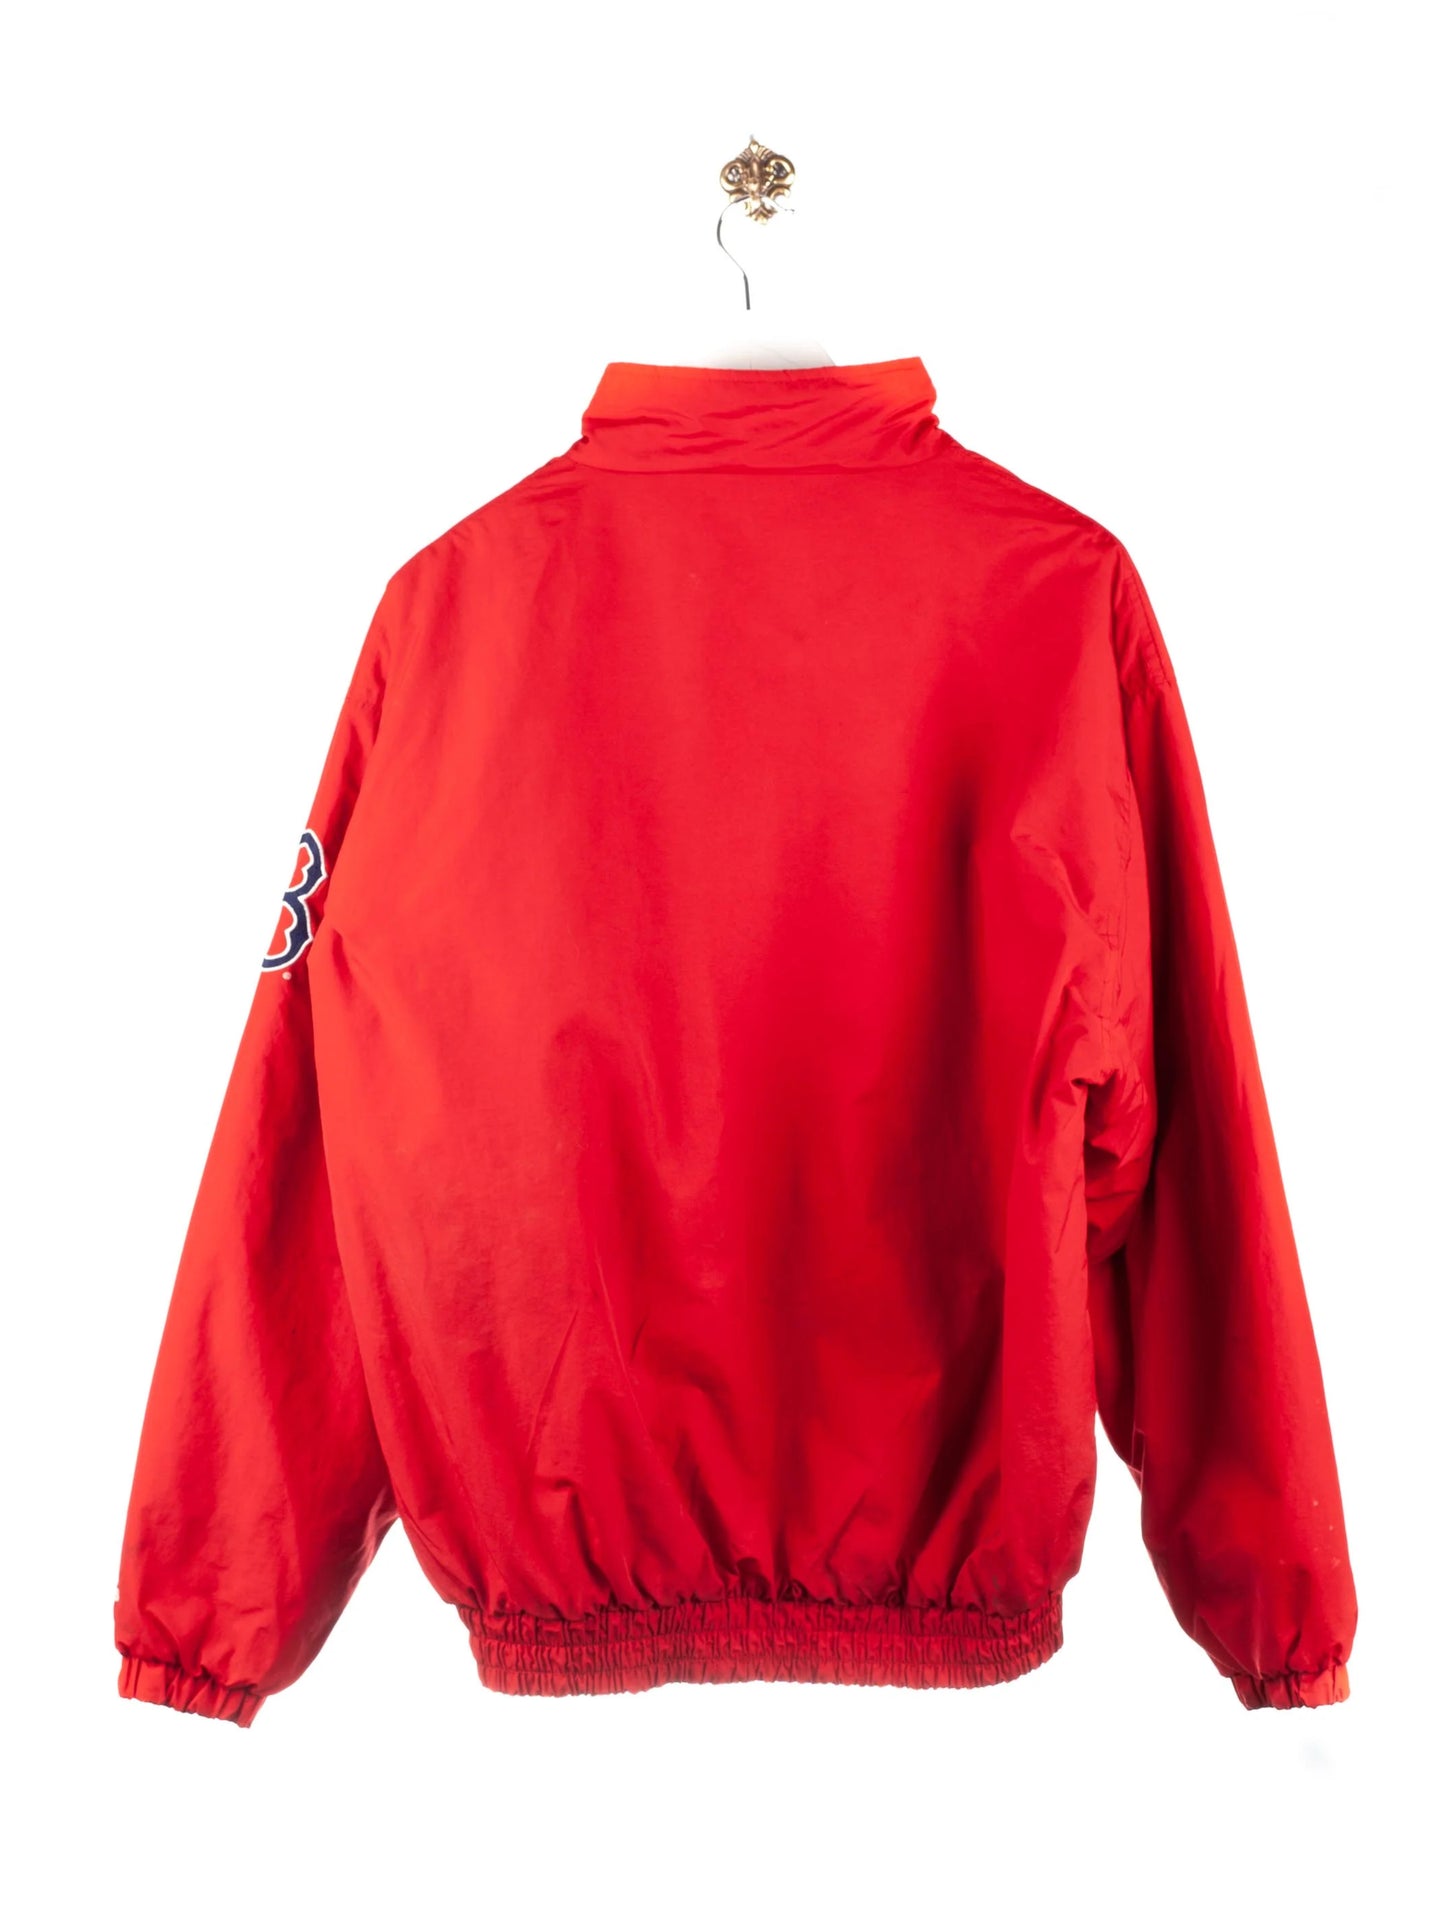 Adidas Collegejacke Red Sox Rot